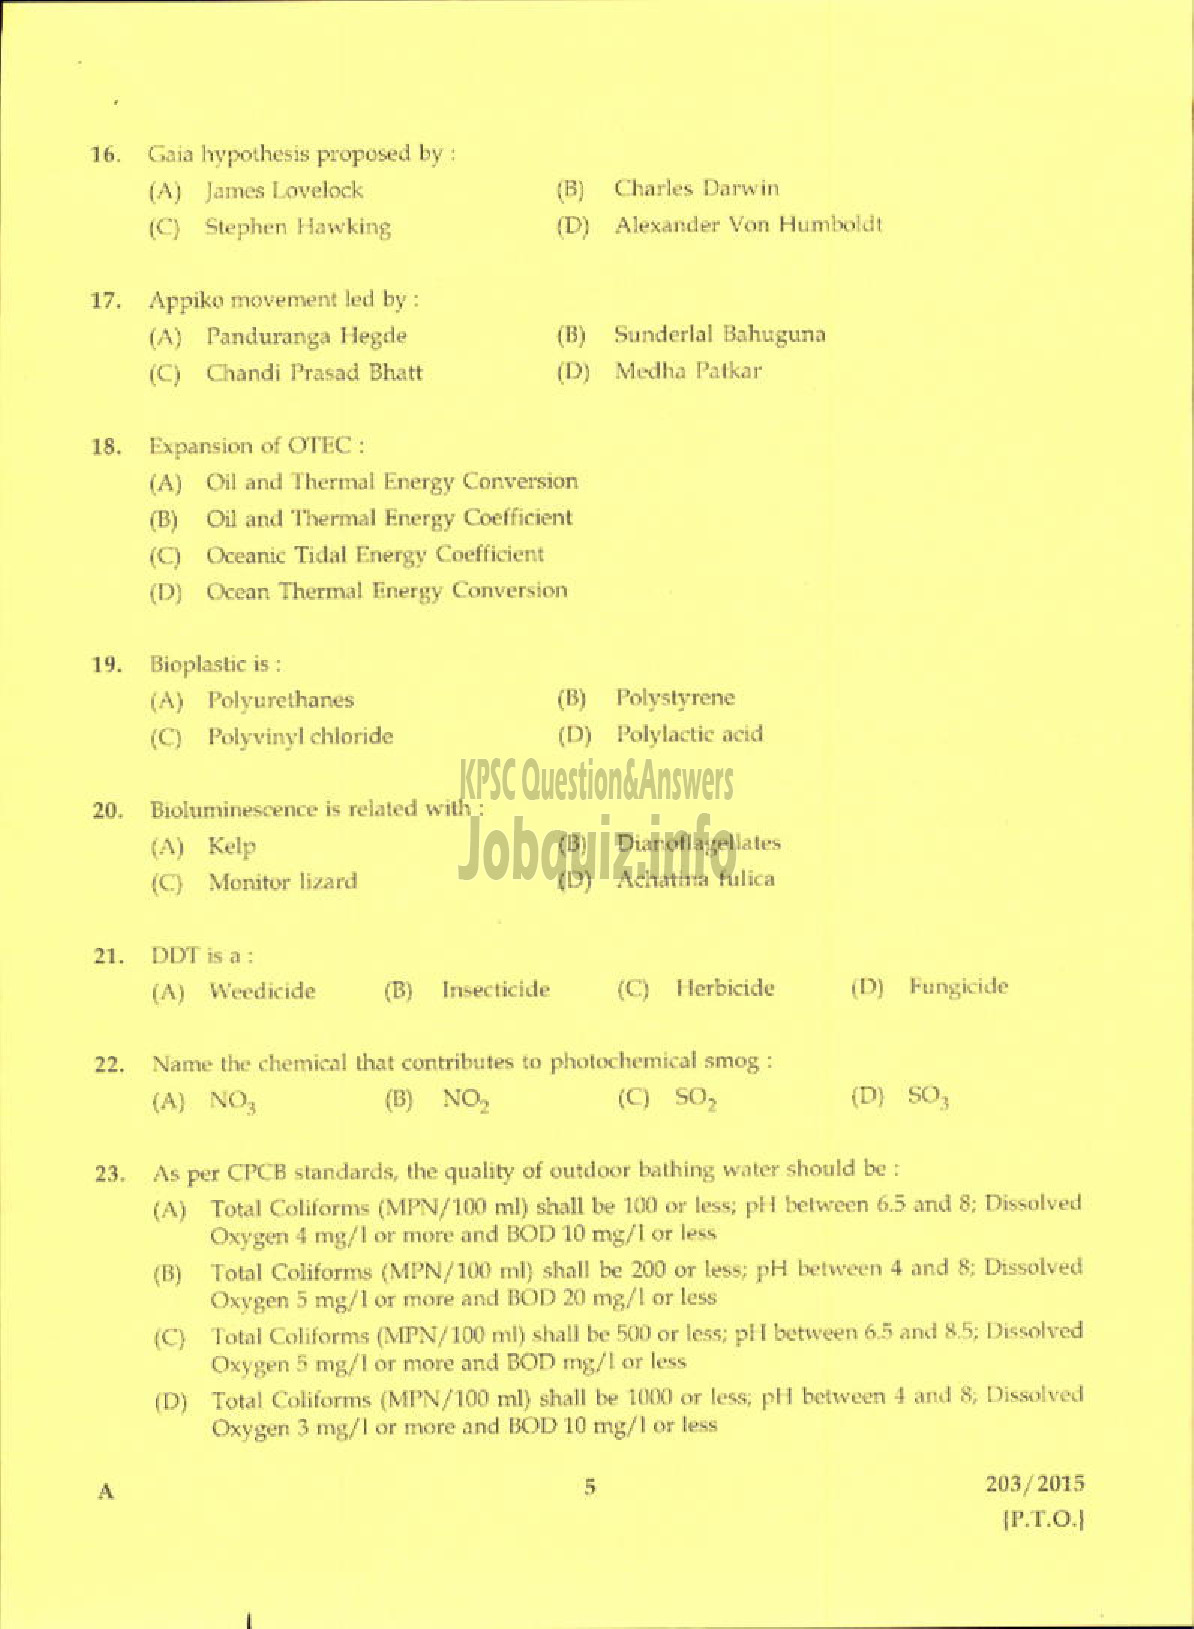 Kerala PSC Question Paper - ASSISTANT ENVIRONMENTAL OFFICER ENVIRONMENT AND CLIMATE CHANGE-3